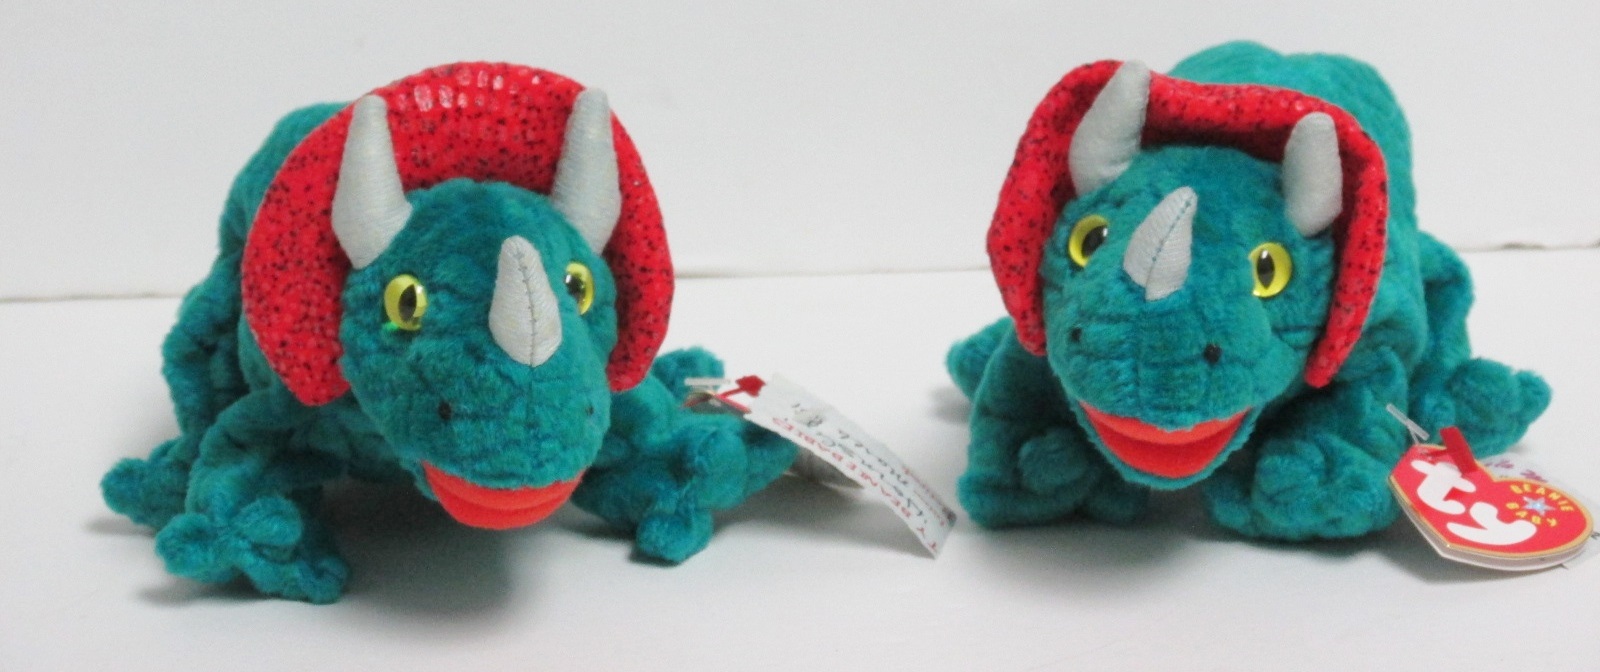 Toy HORNSLY the Dinosaur TY Beanie Baby by Ty TOY 